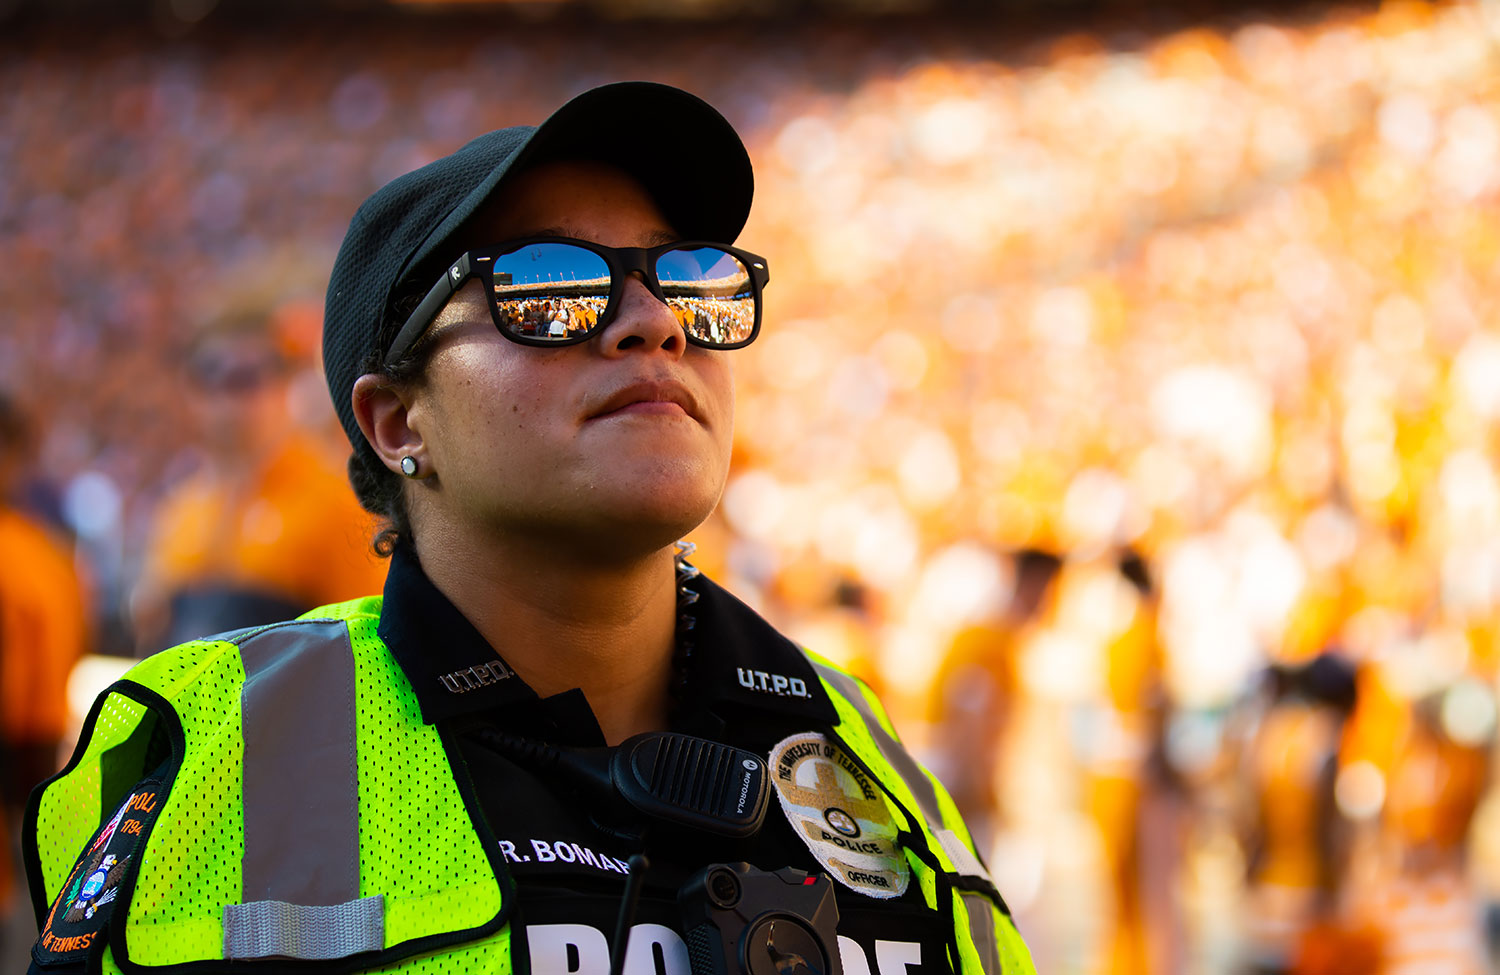 A uniformed UTPD officer stands on the sidelines during a sports event